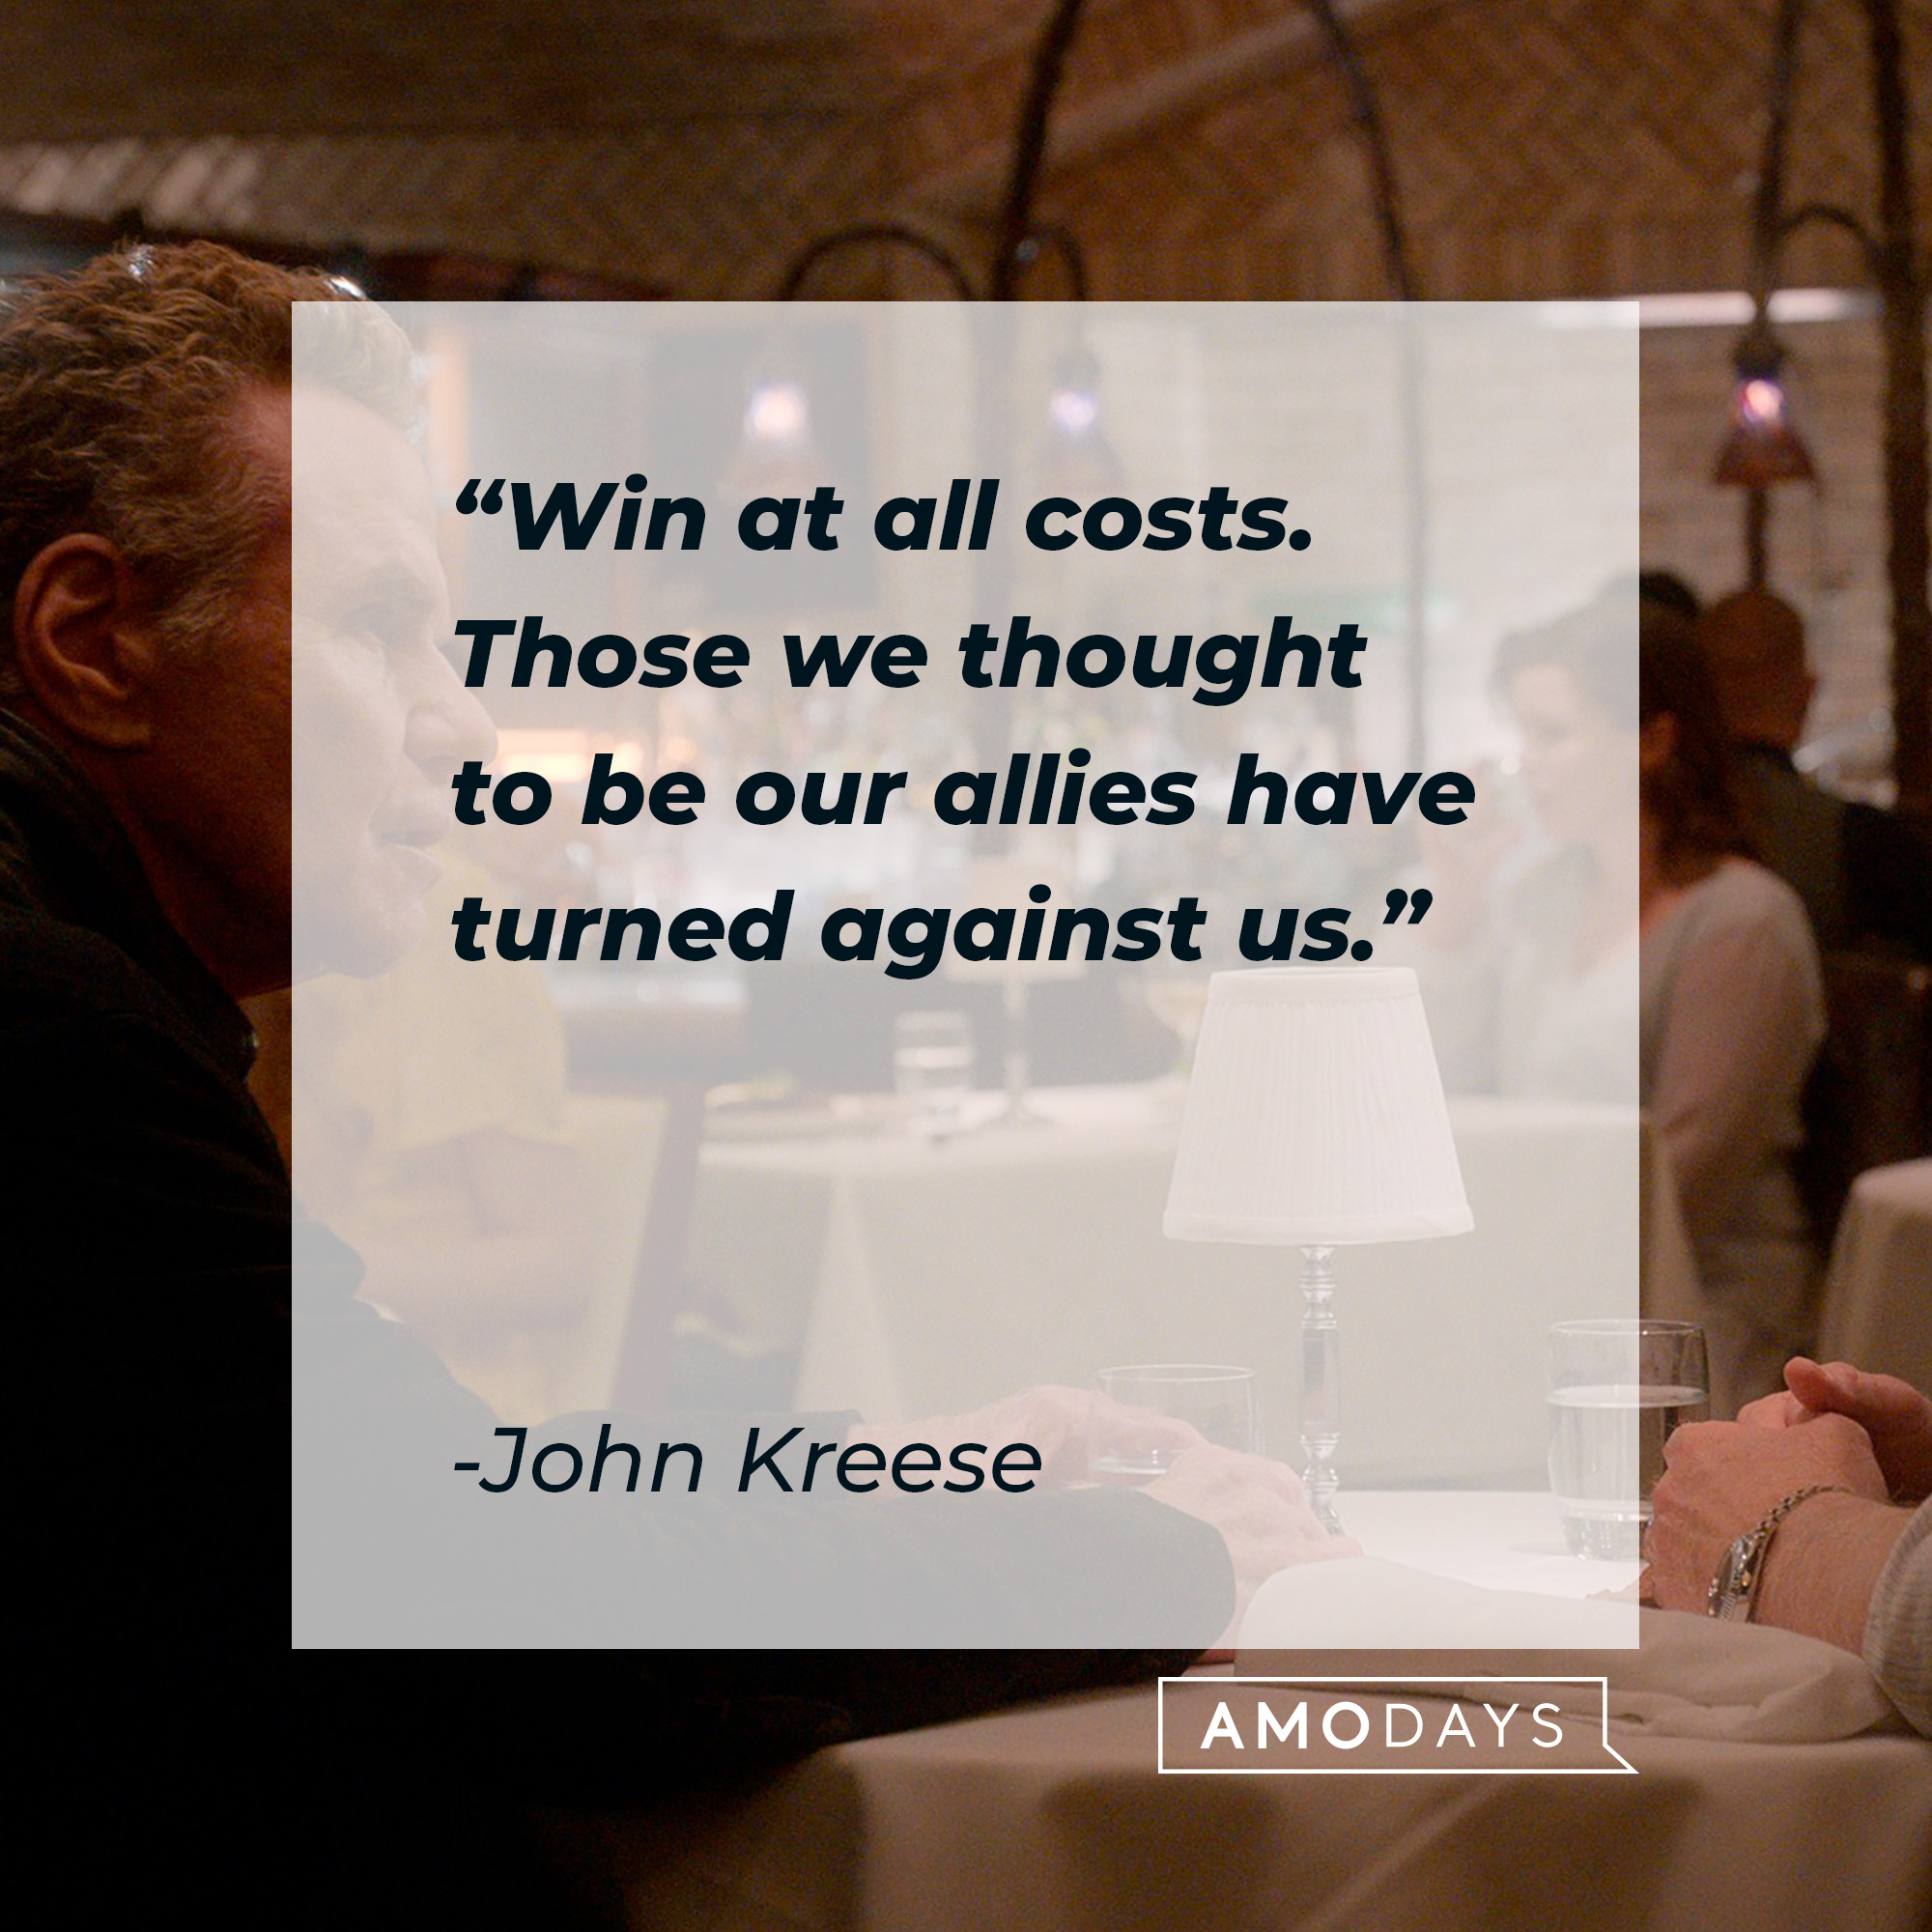 John Kreese, with his quote: “Win at all costs. Those we thought to be our allies have turned against us.” │Source: facebook.com/CobraKaiSeries